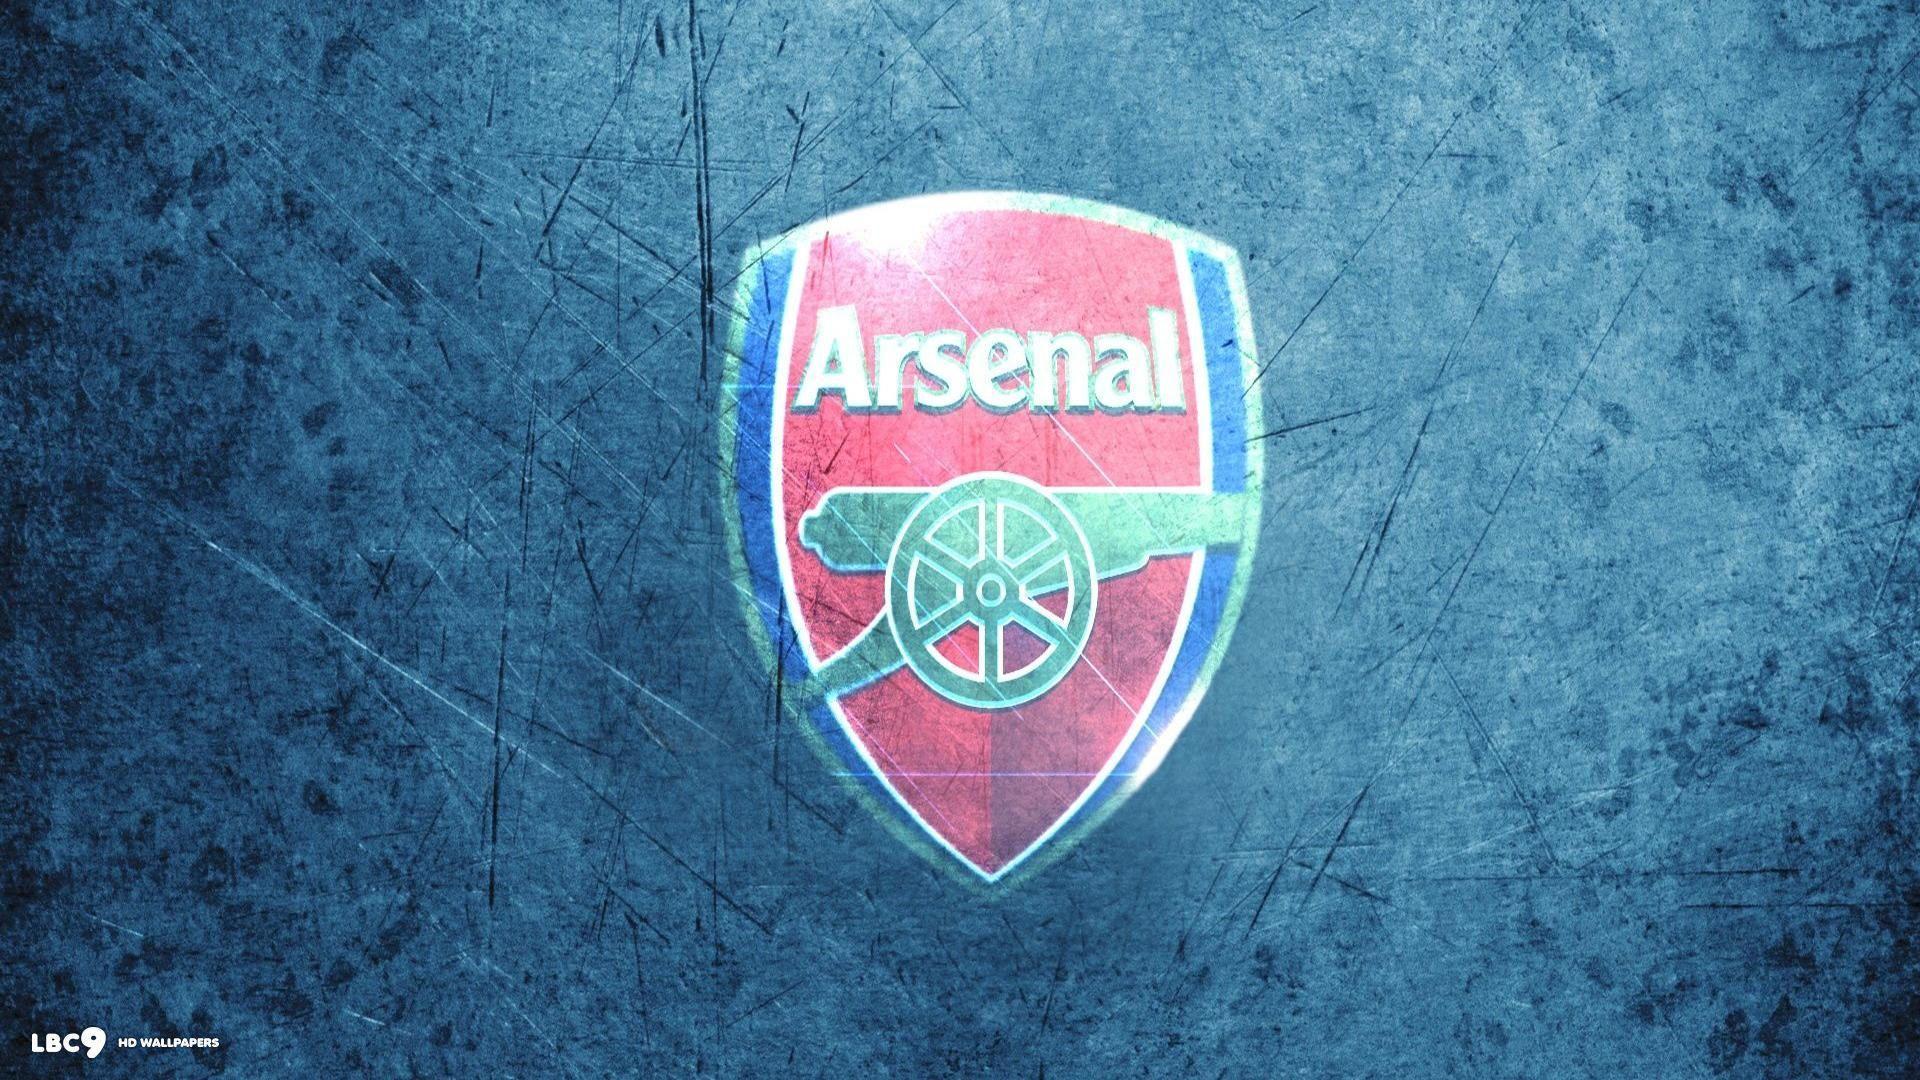 cool arsenal football club - Image And Wallpaper free to